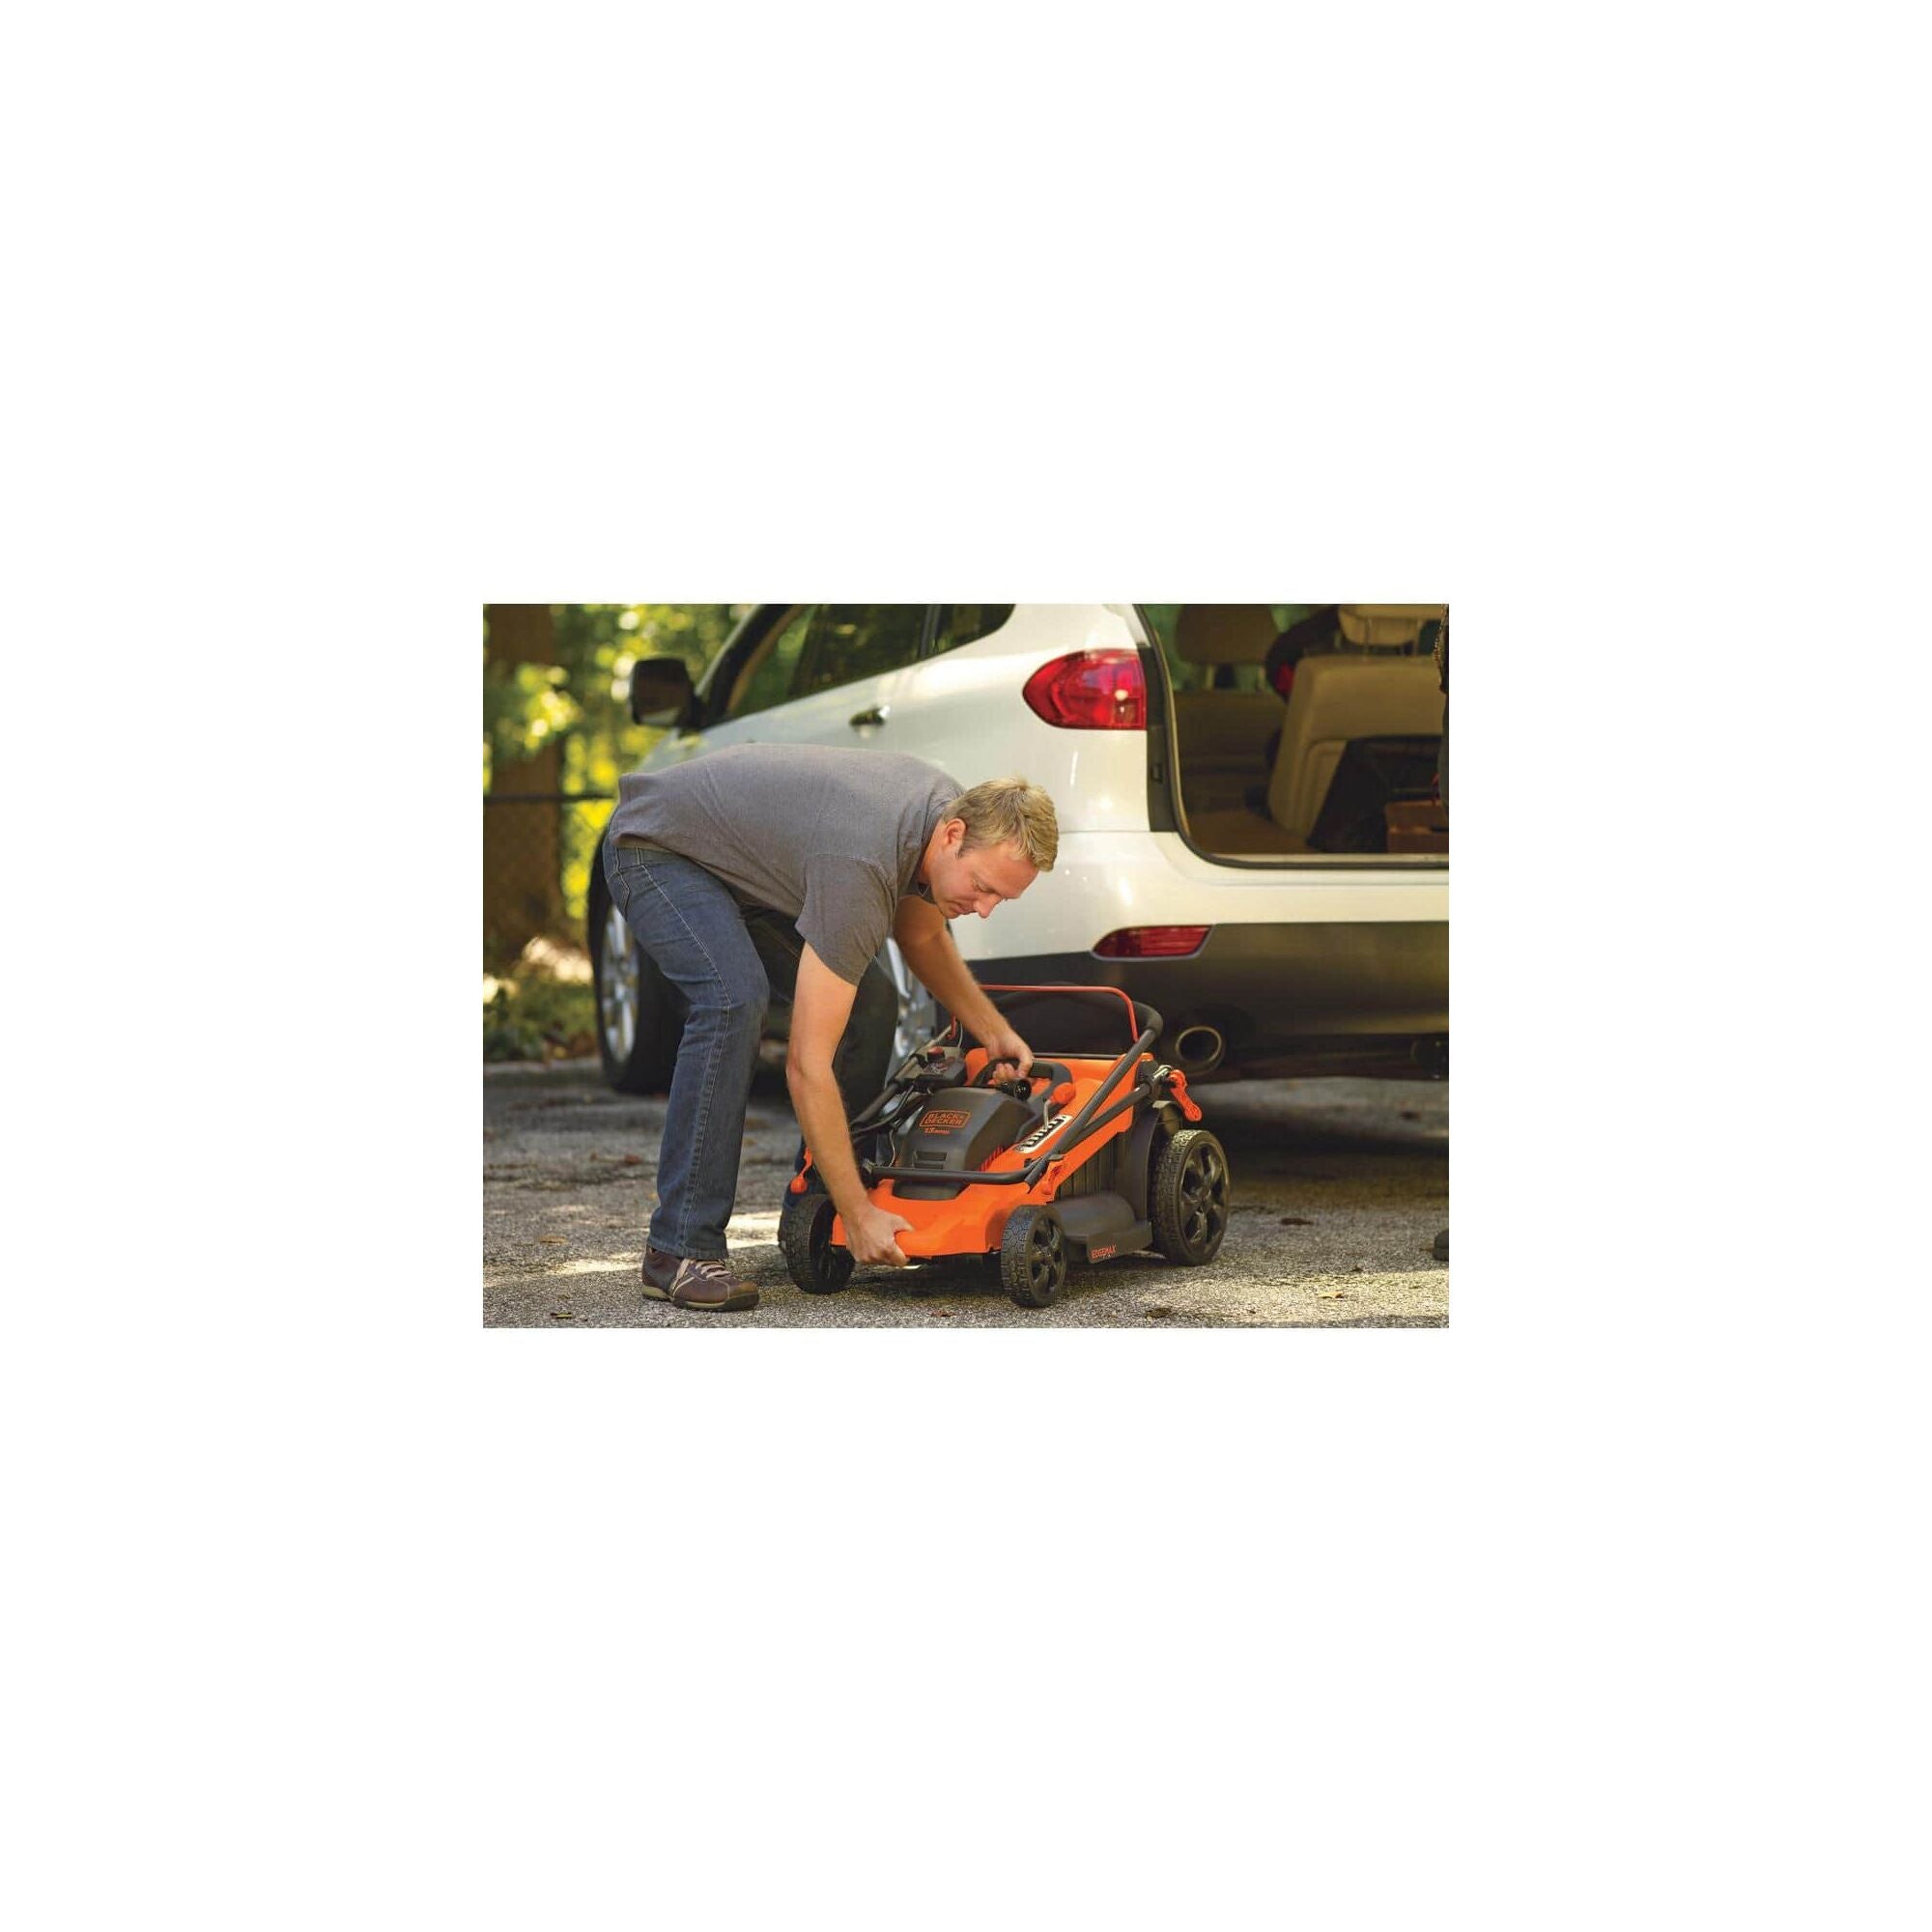 BLACK+DECKER 40V MAX* Cordless Lawn Mower with Battery and Charger Included  (CM2043C)